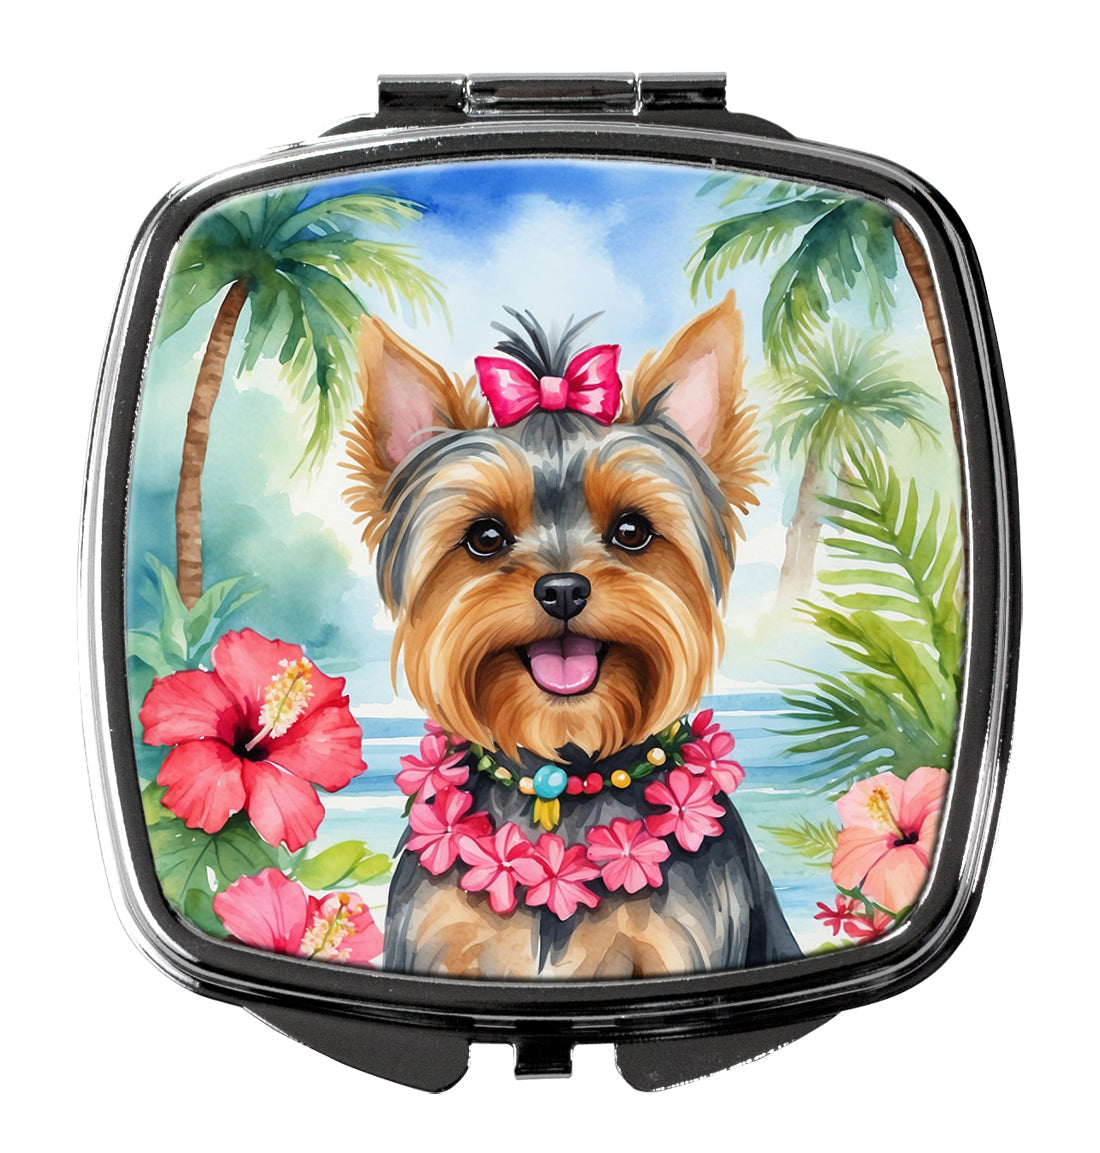 Buy this Yorkshire Terrier Luau Compact Mirror